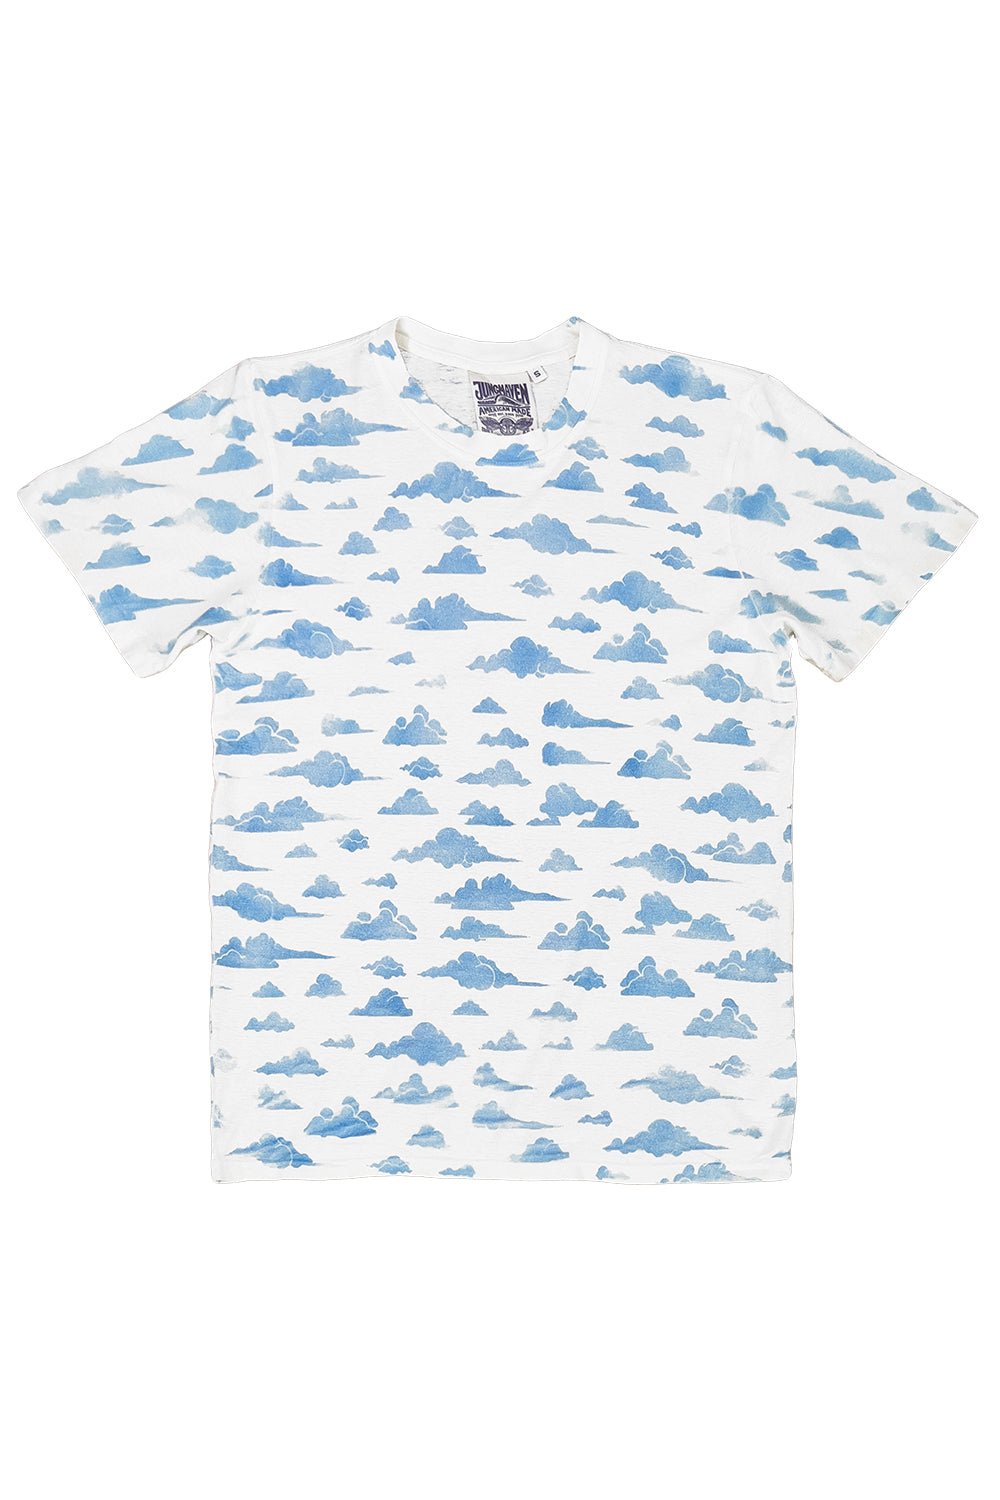 Clouds Jung Tee | Jungmaven Hemp Clothing & Accessories / Color: Washed White